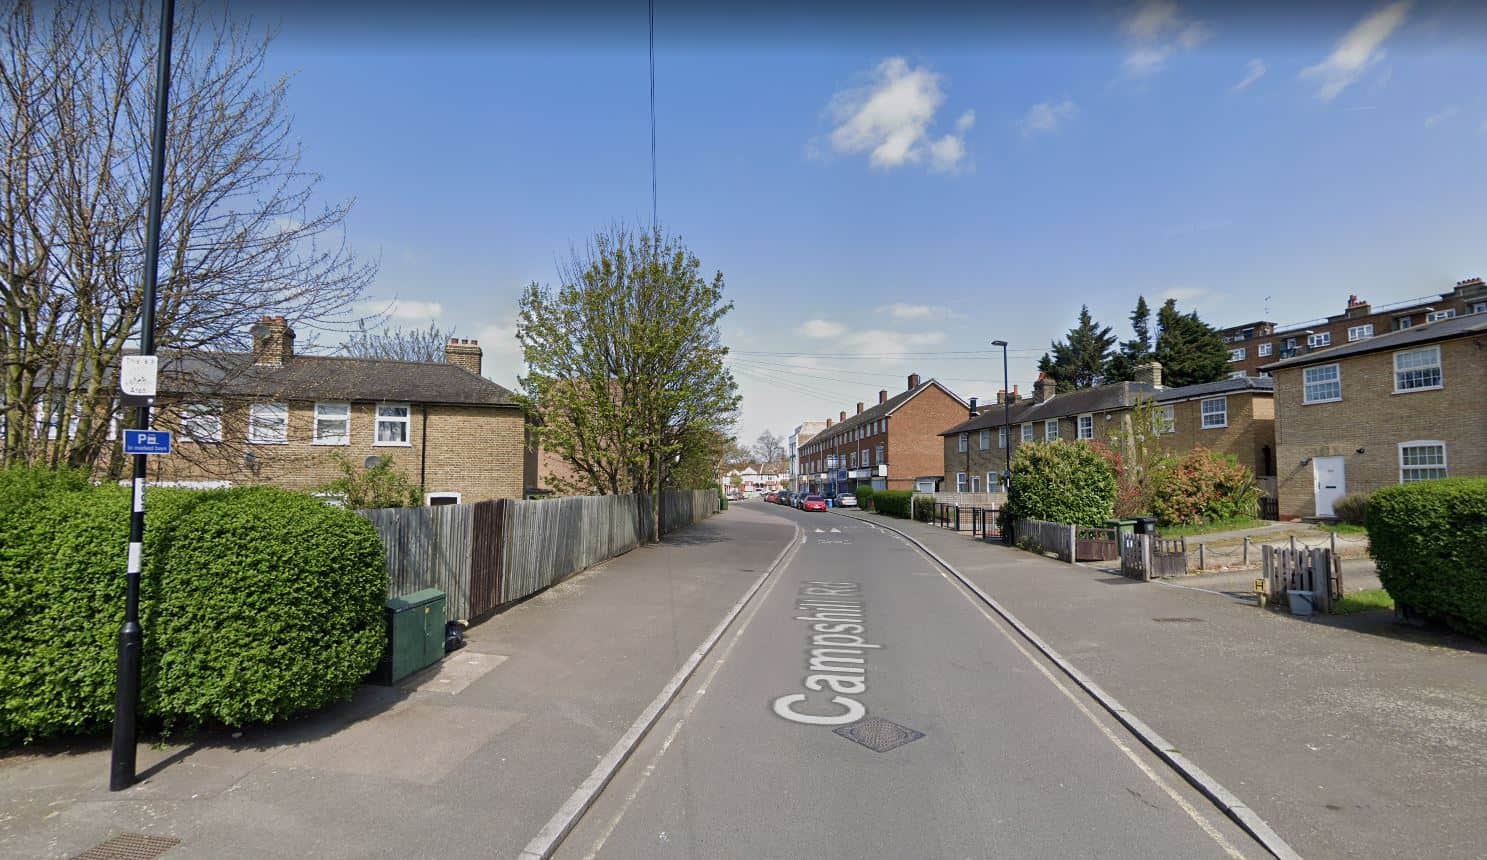 Police found one of the victims in Campshill Road (pictured) Image: Google Maps